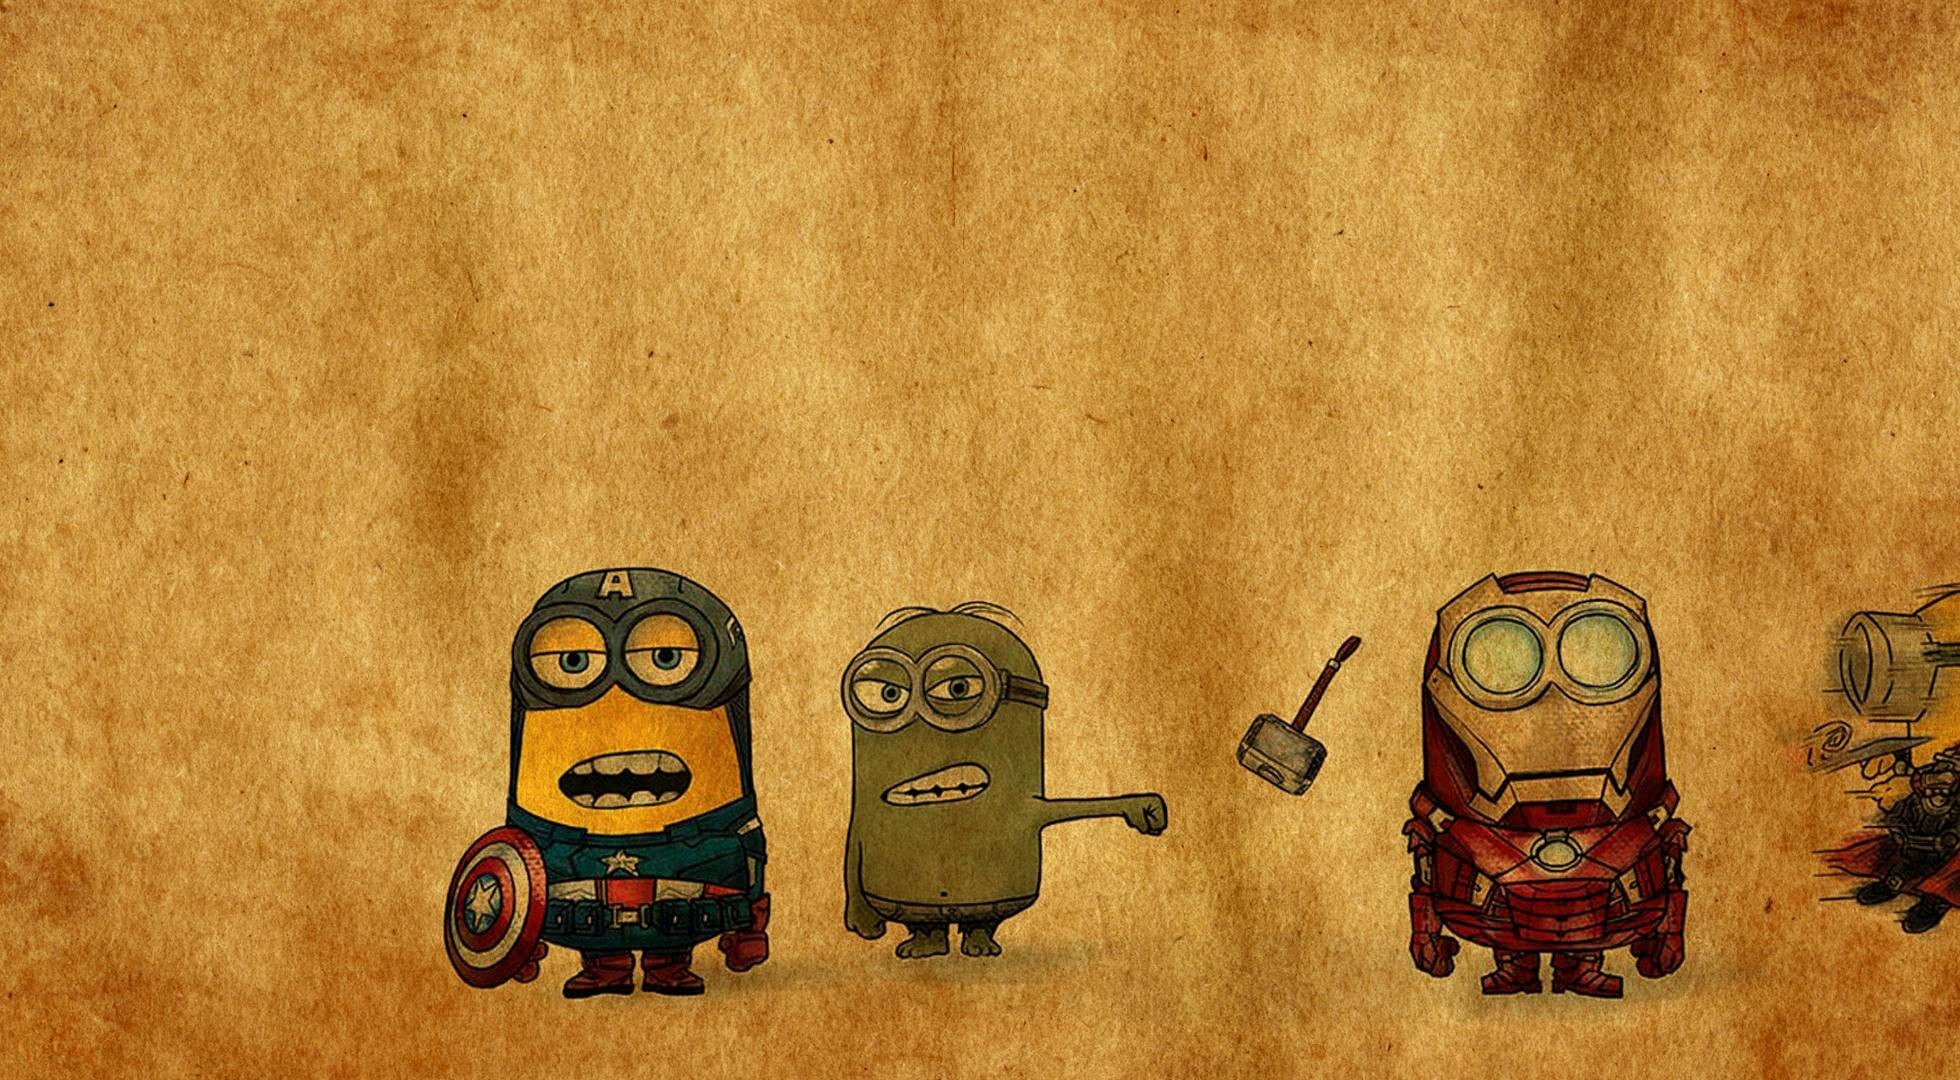 General 1960x1080 minions Despicable Me The Avengers humor crossover grunge simple background movies Universal Pictures